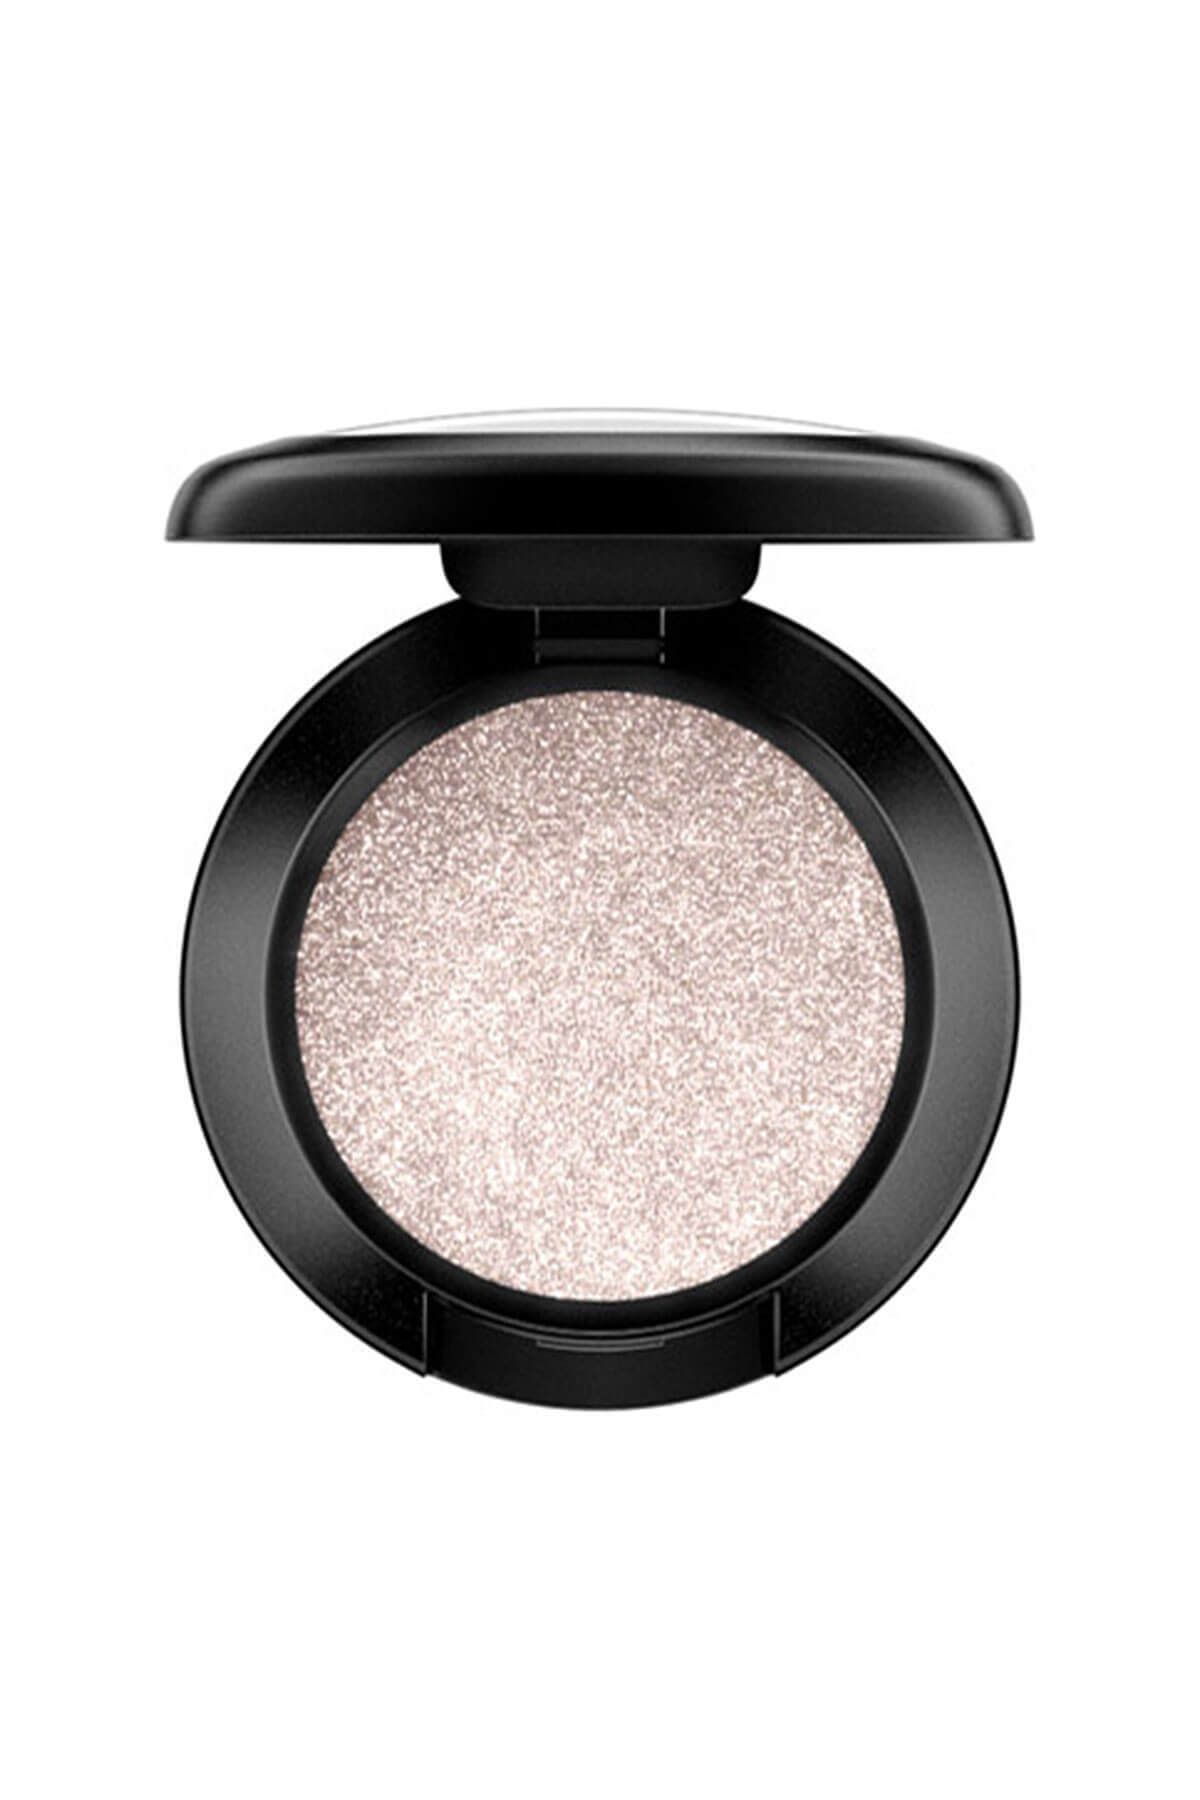 Mac INTENSELY PİGMENTED EYESHADOW PALETTE - DAZZLESHADOW SHE SHE SPARKLES 1.5 G PSSN1337